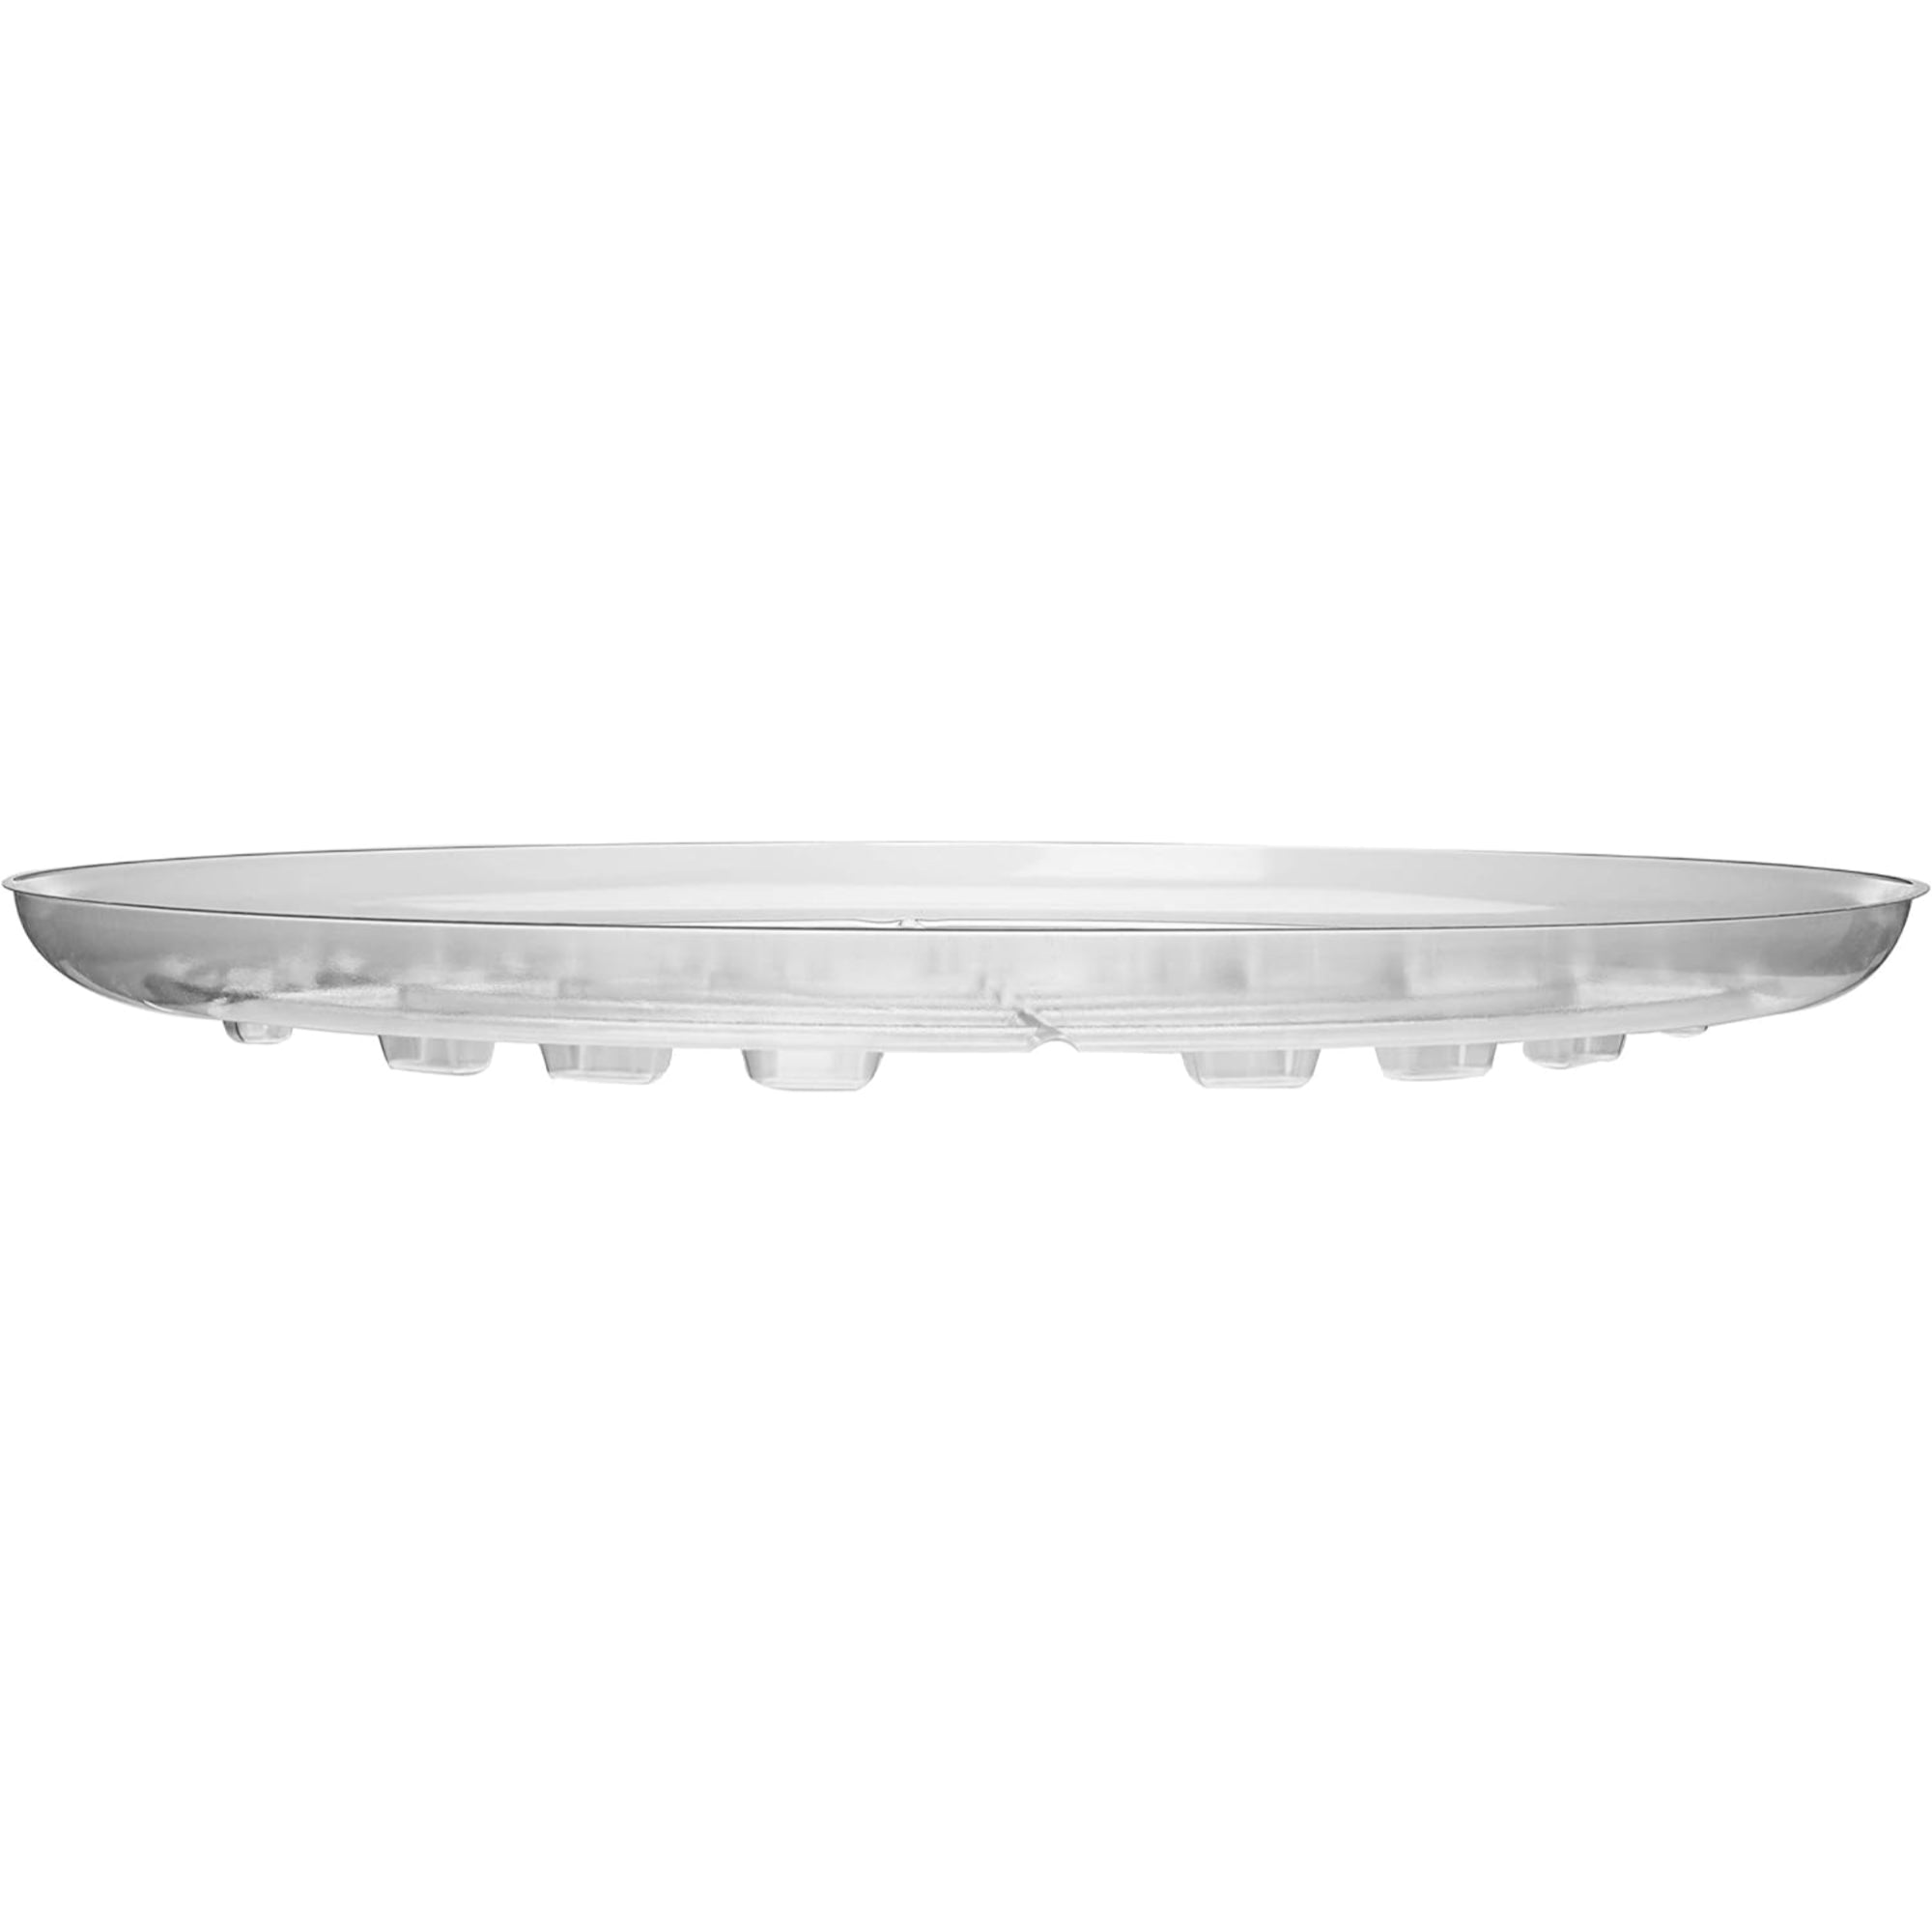 Bosmere Clear Down Under Plastic Plant Saucer, 21"